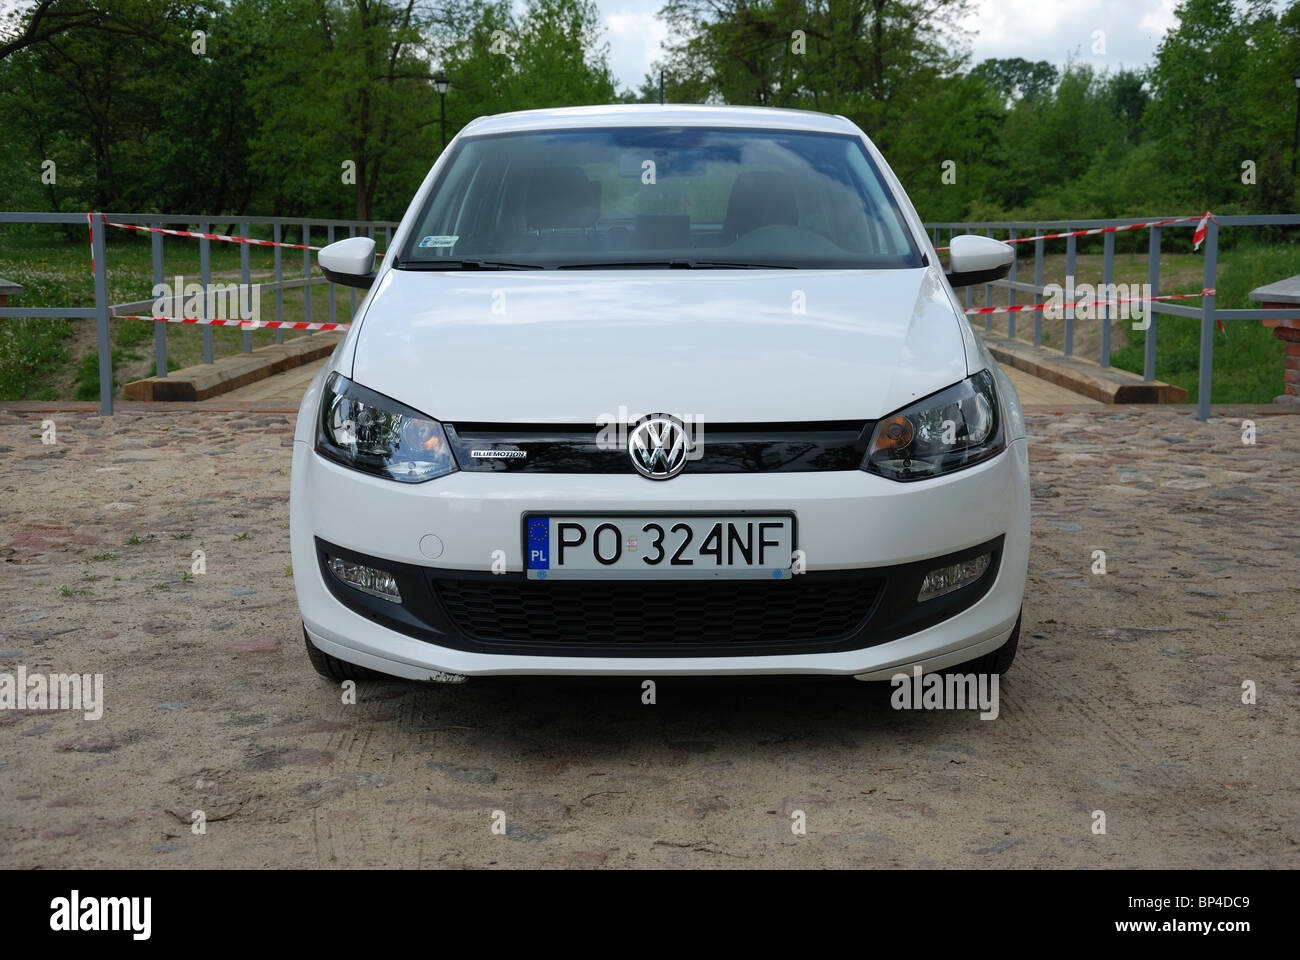 Page 12 - Vw Polo Car High Resolution Stock Photography and Images - Alamy